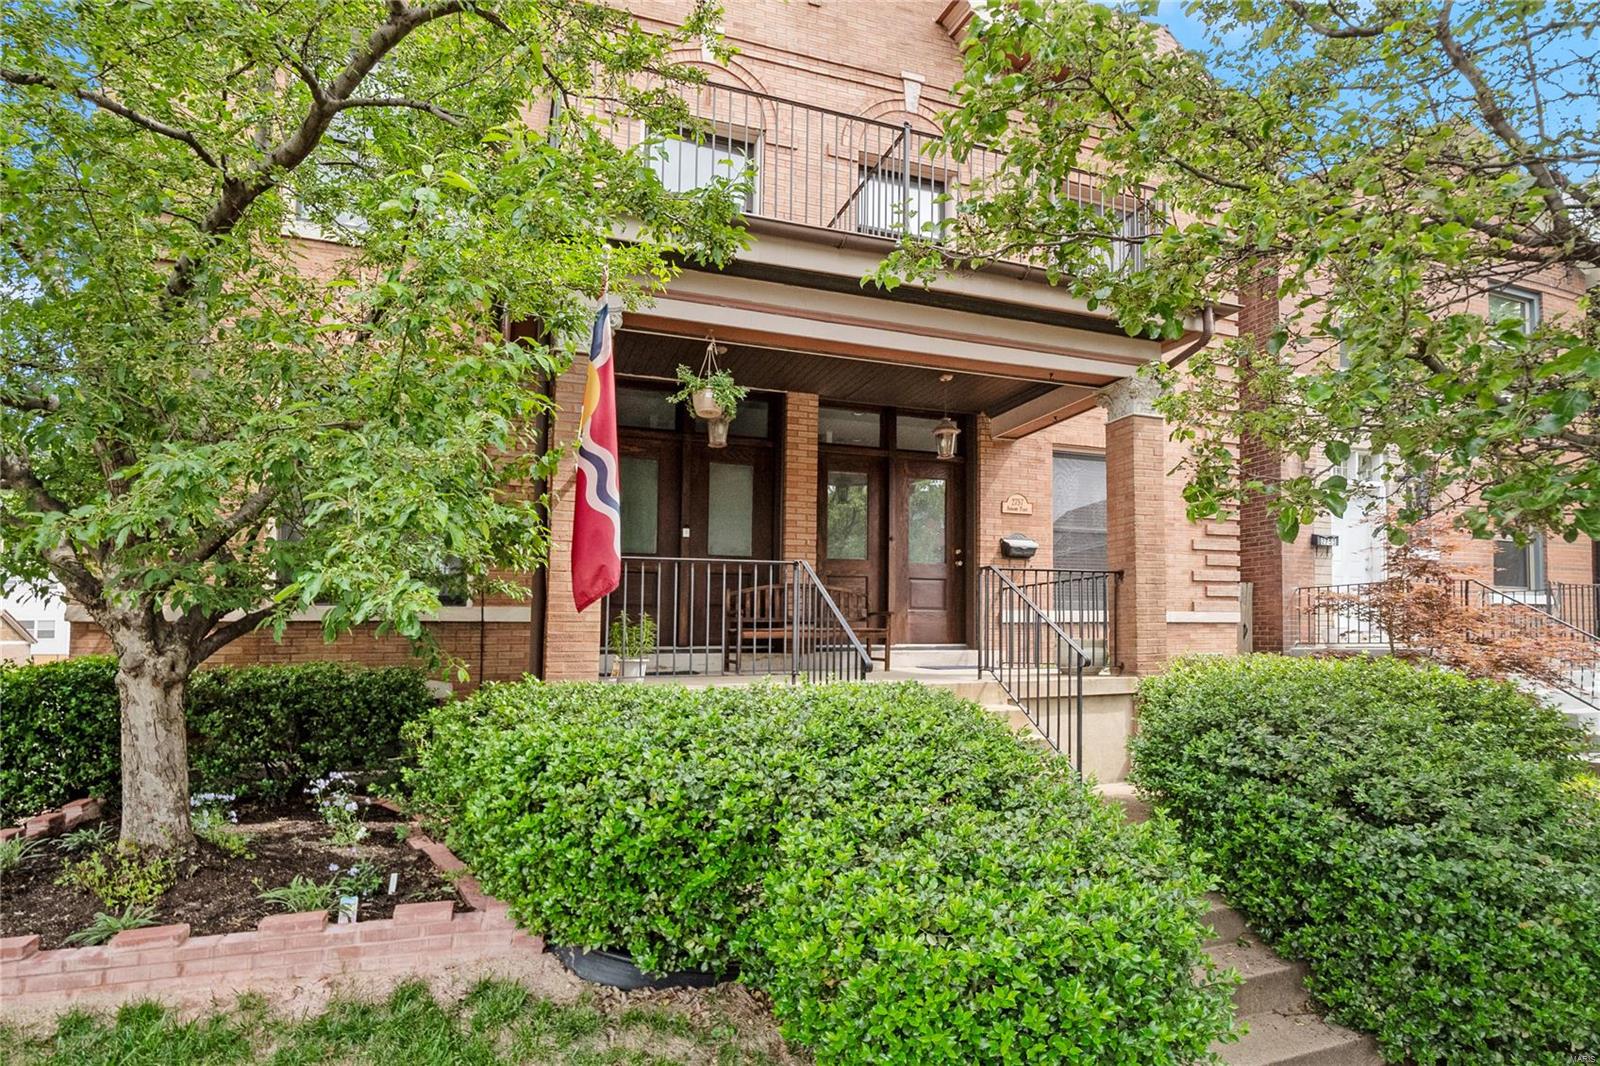 View St Louis, MO 63104 townhome